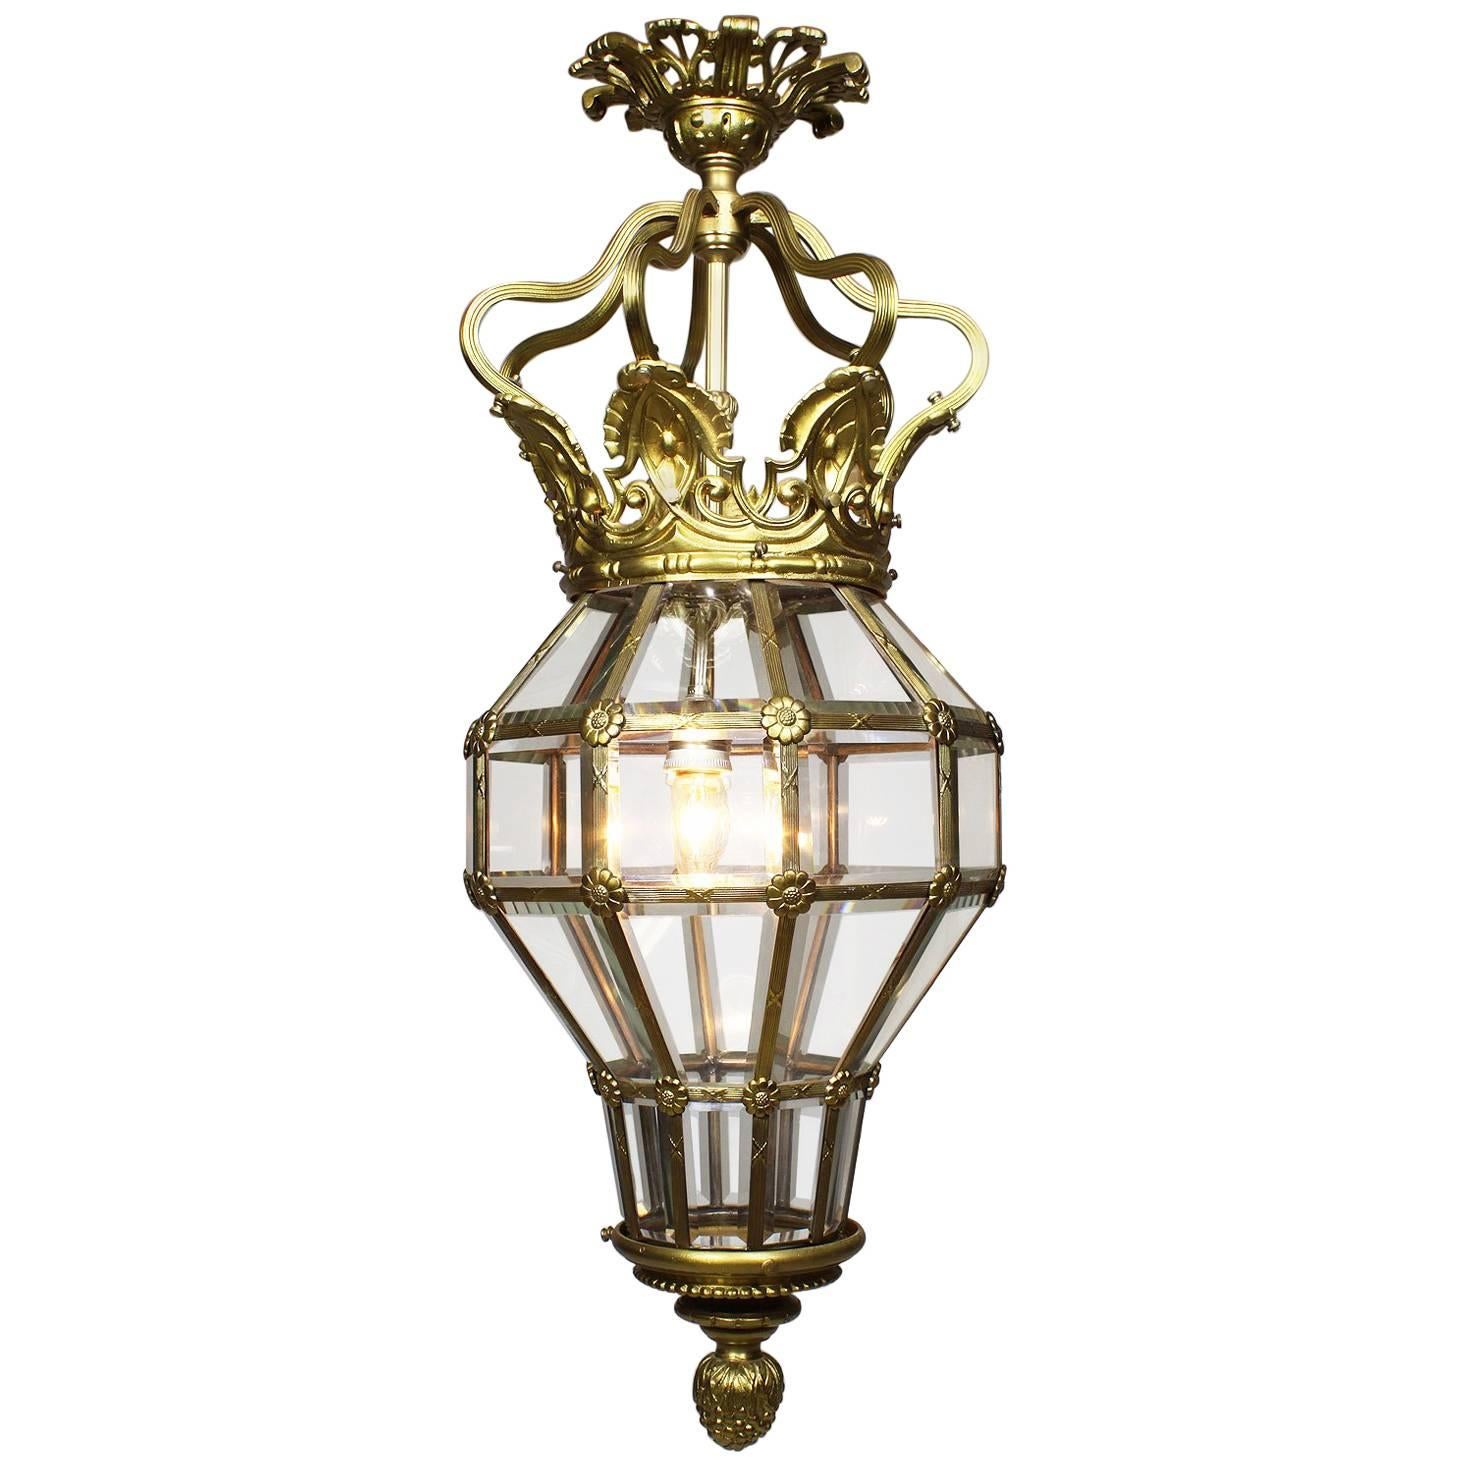 Early 20th Century Gilt-Metal and Glass "Versailles" Style Hanging Lantern